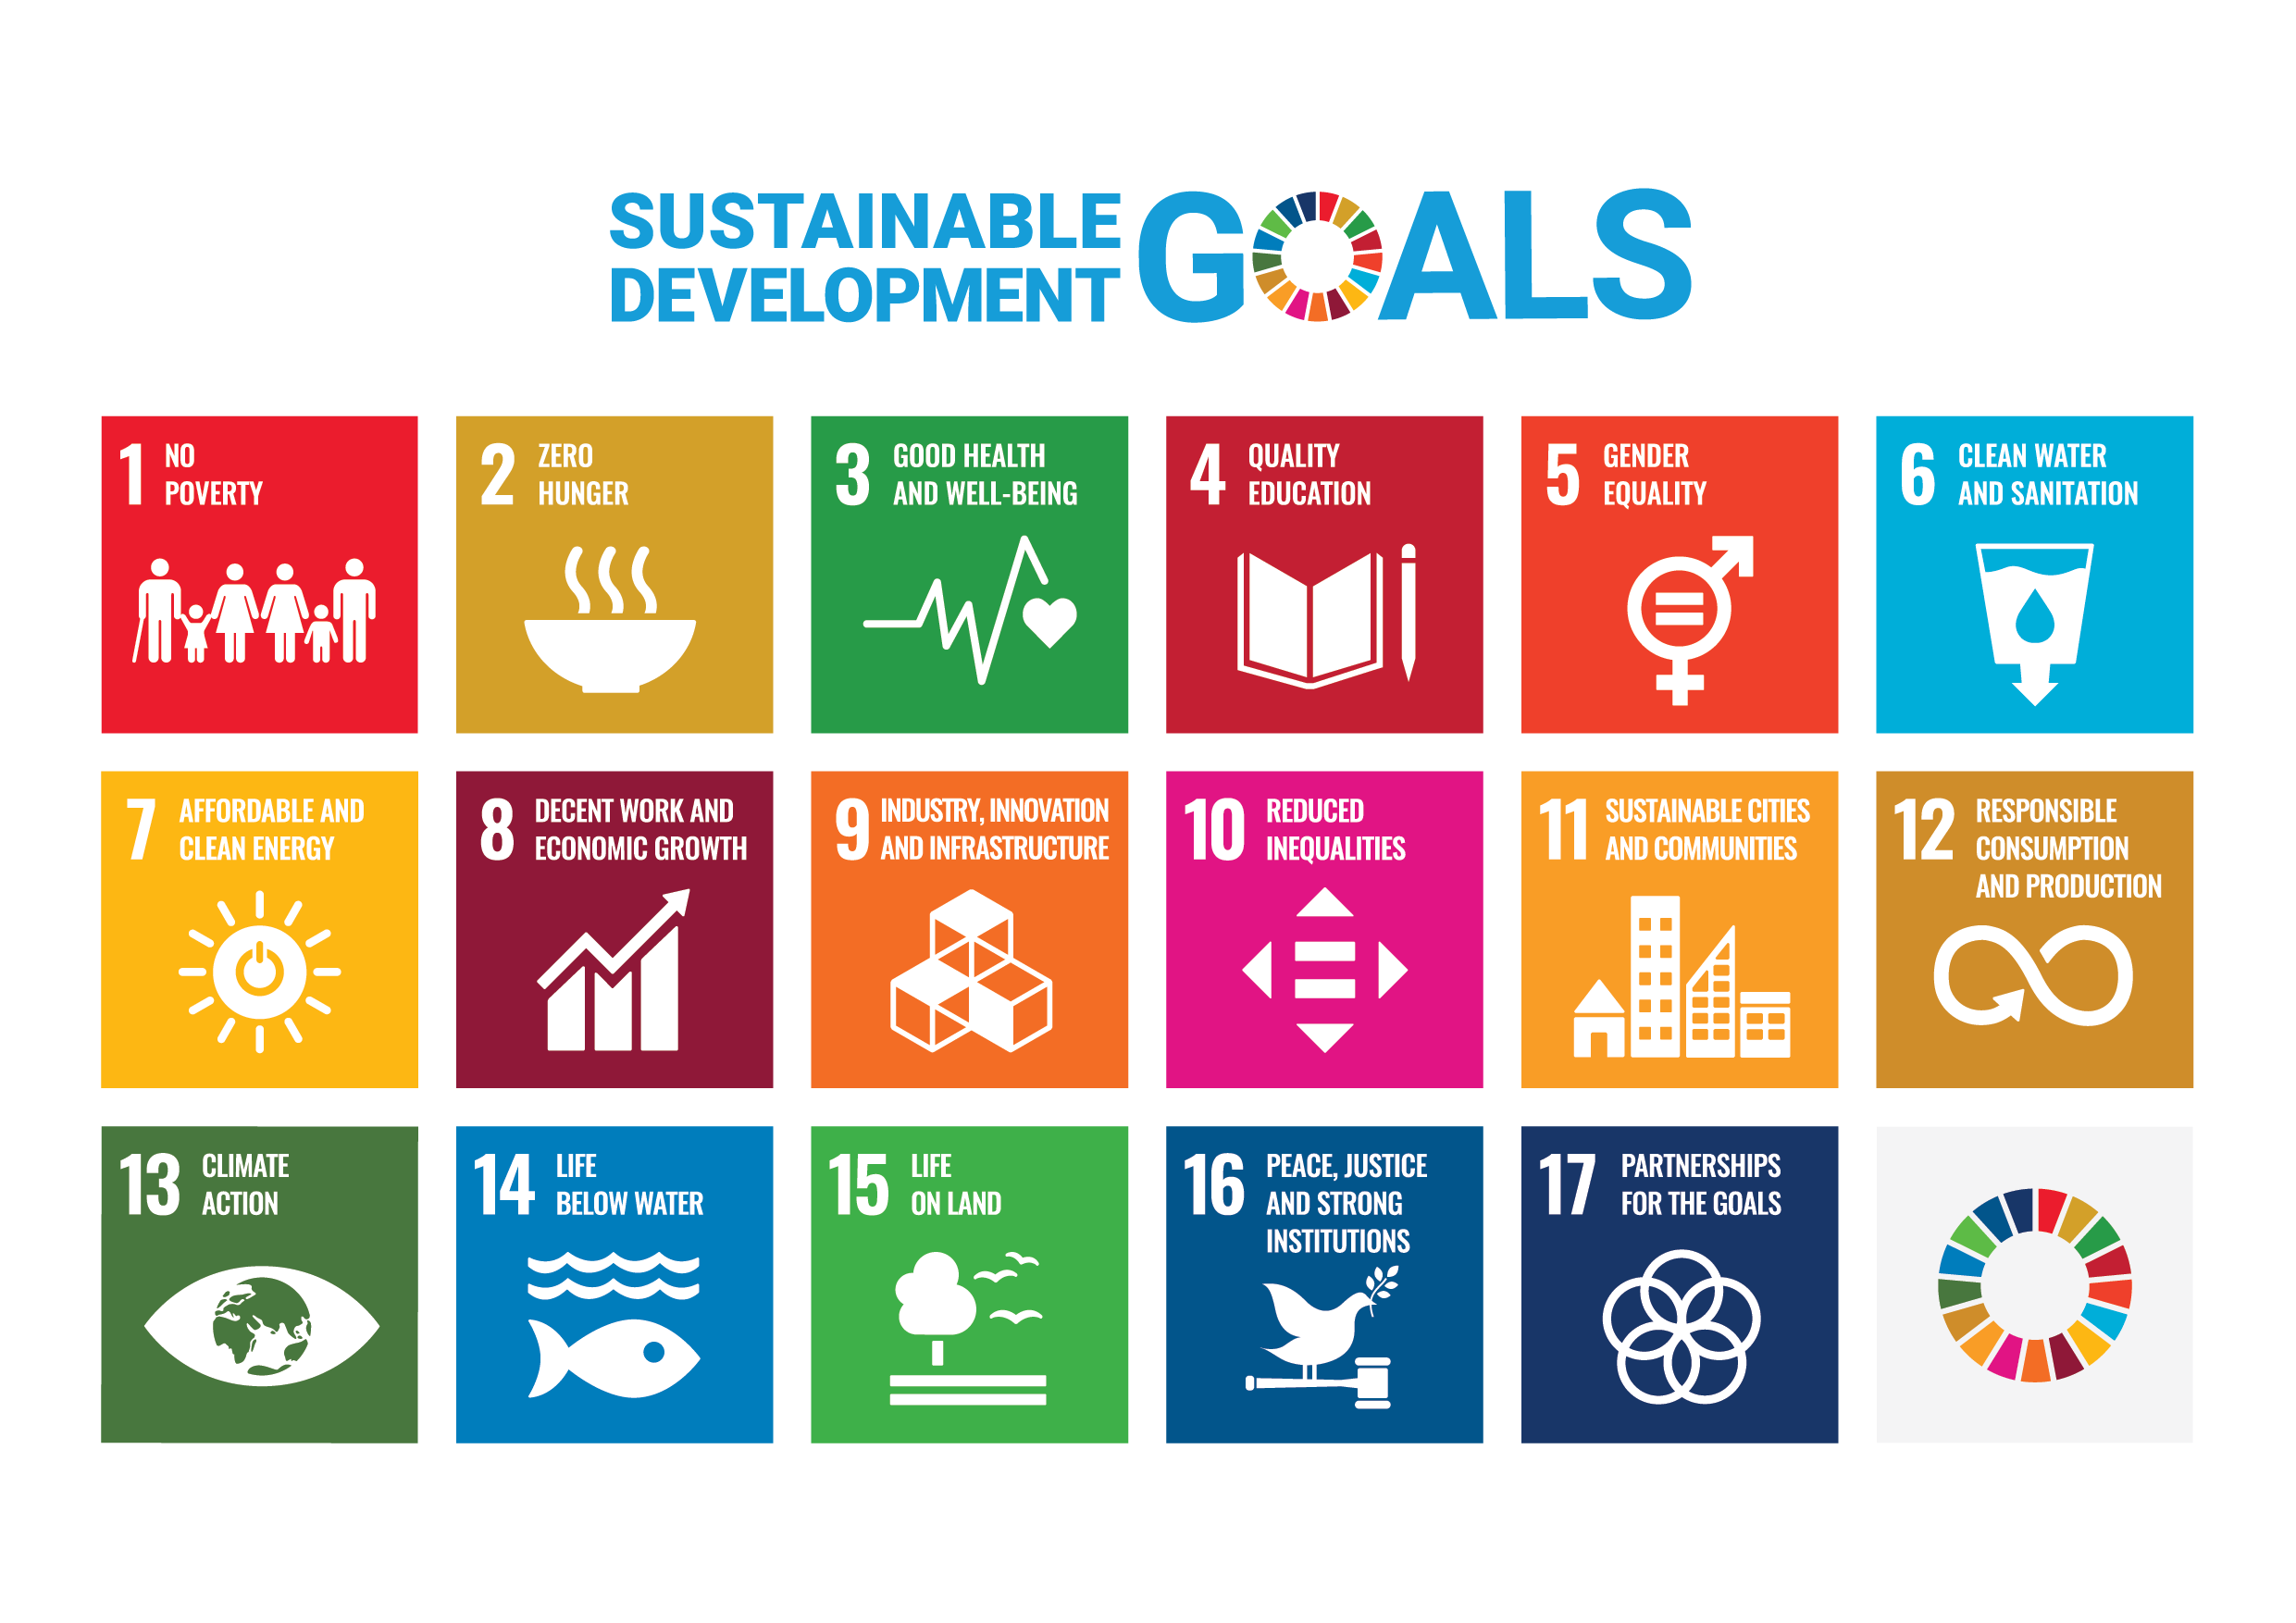 Mapping UCC research to the SDGs